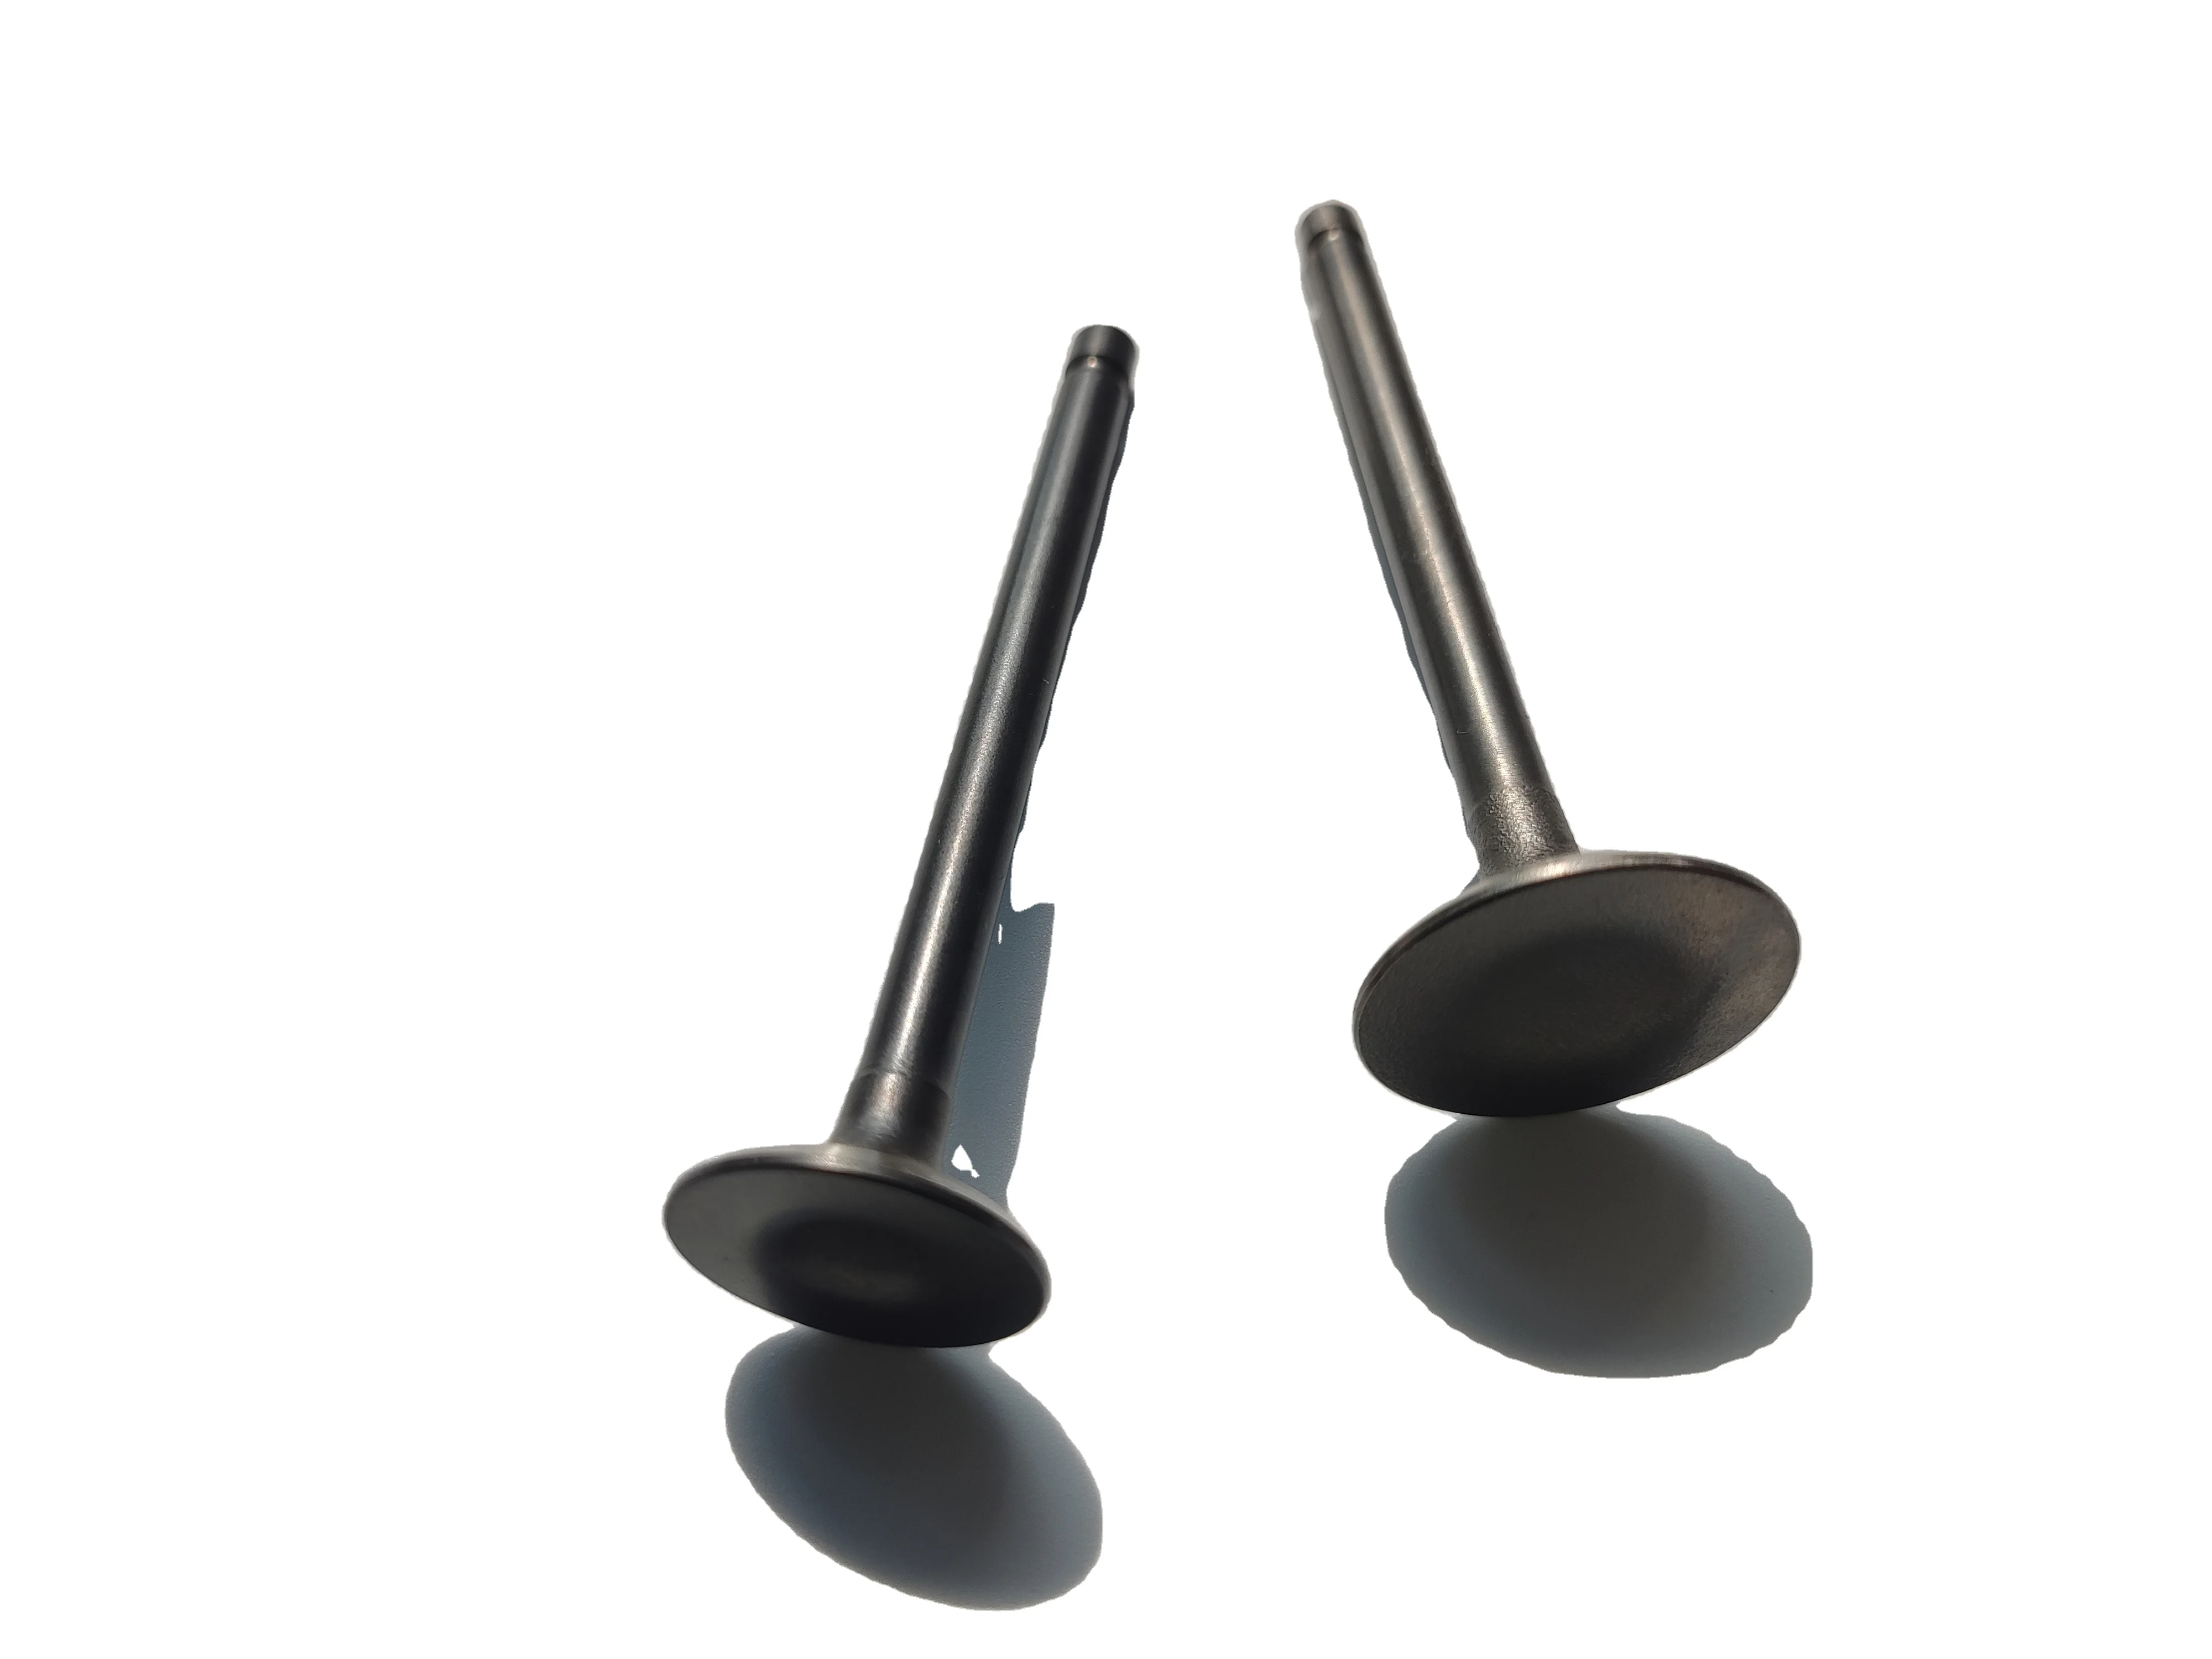 CQJB Motorcycle Accessories Earth Eagle CA250 Intake and Exhaust Valves